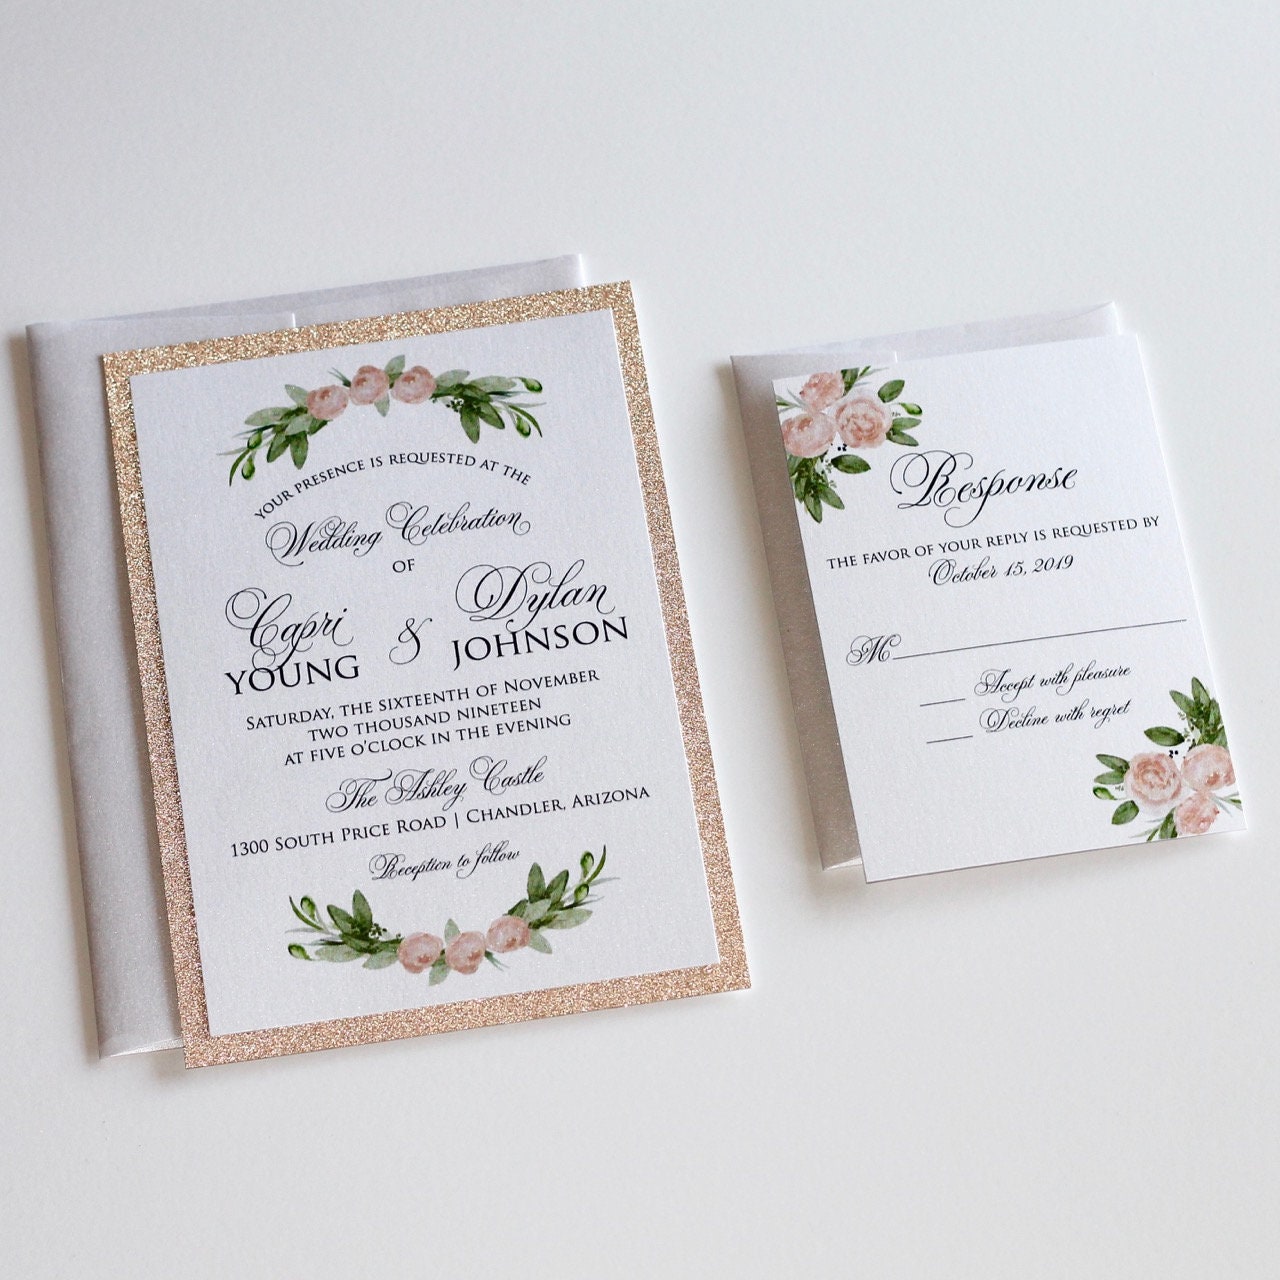 STYLISED ROSE GOLD NUMBERS Eleganza Glitter Stickers Invitations